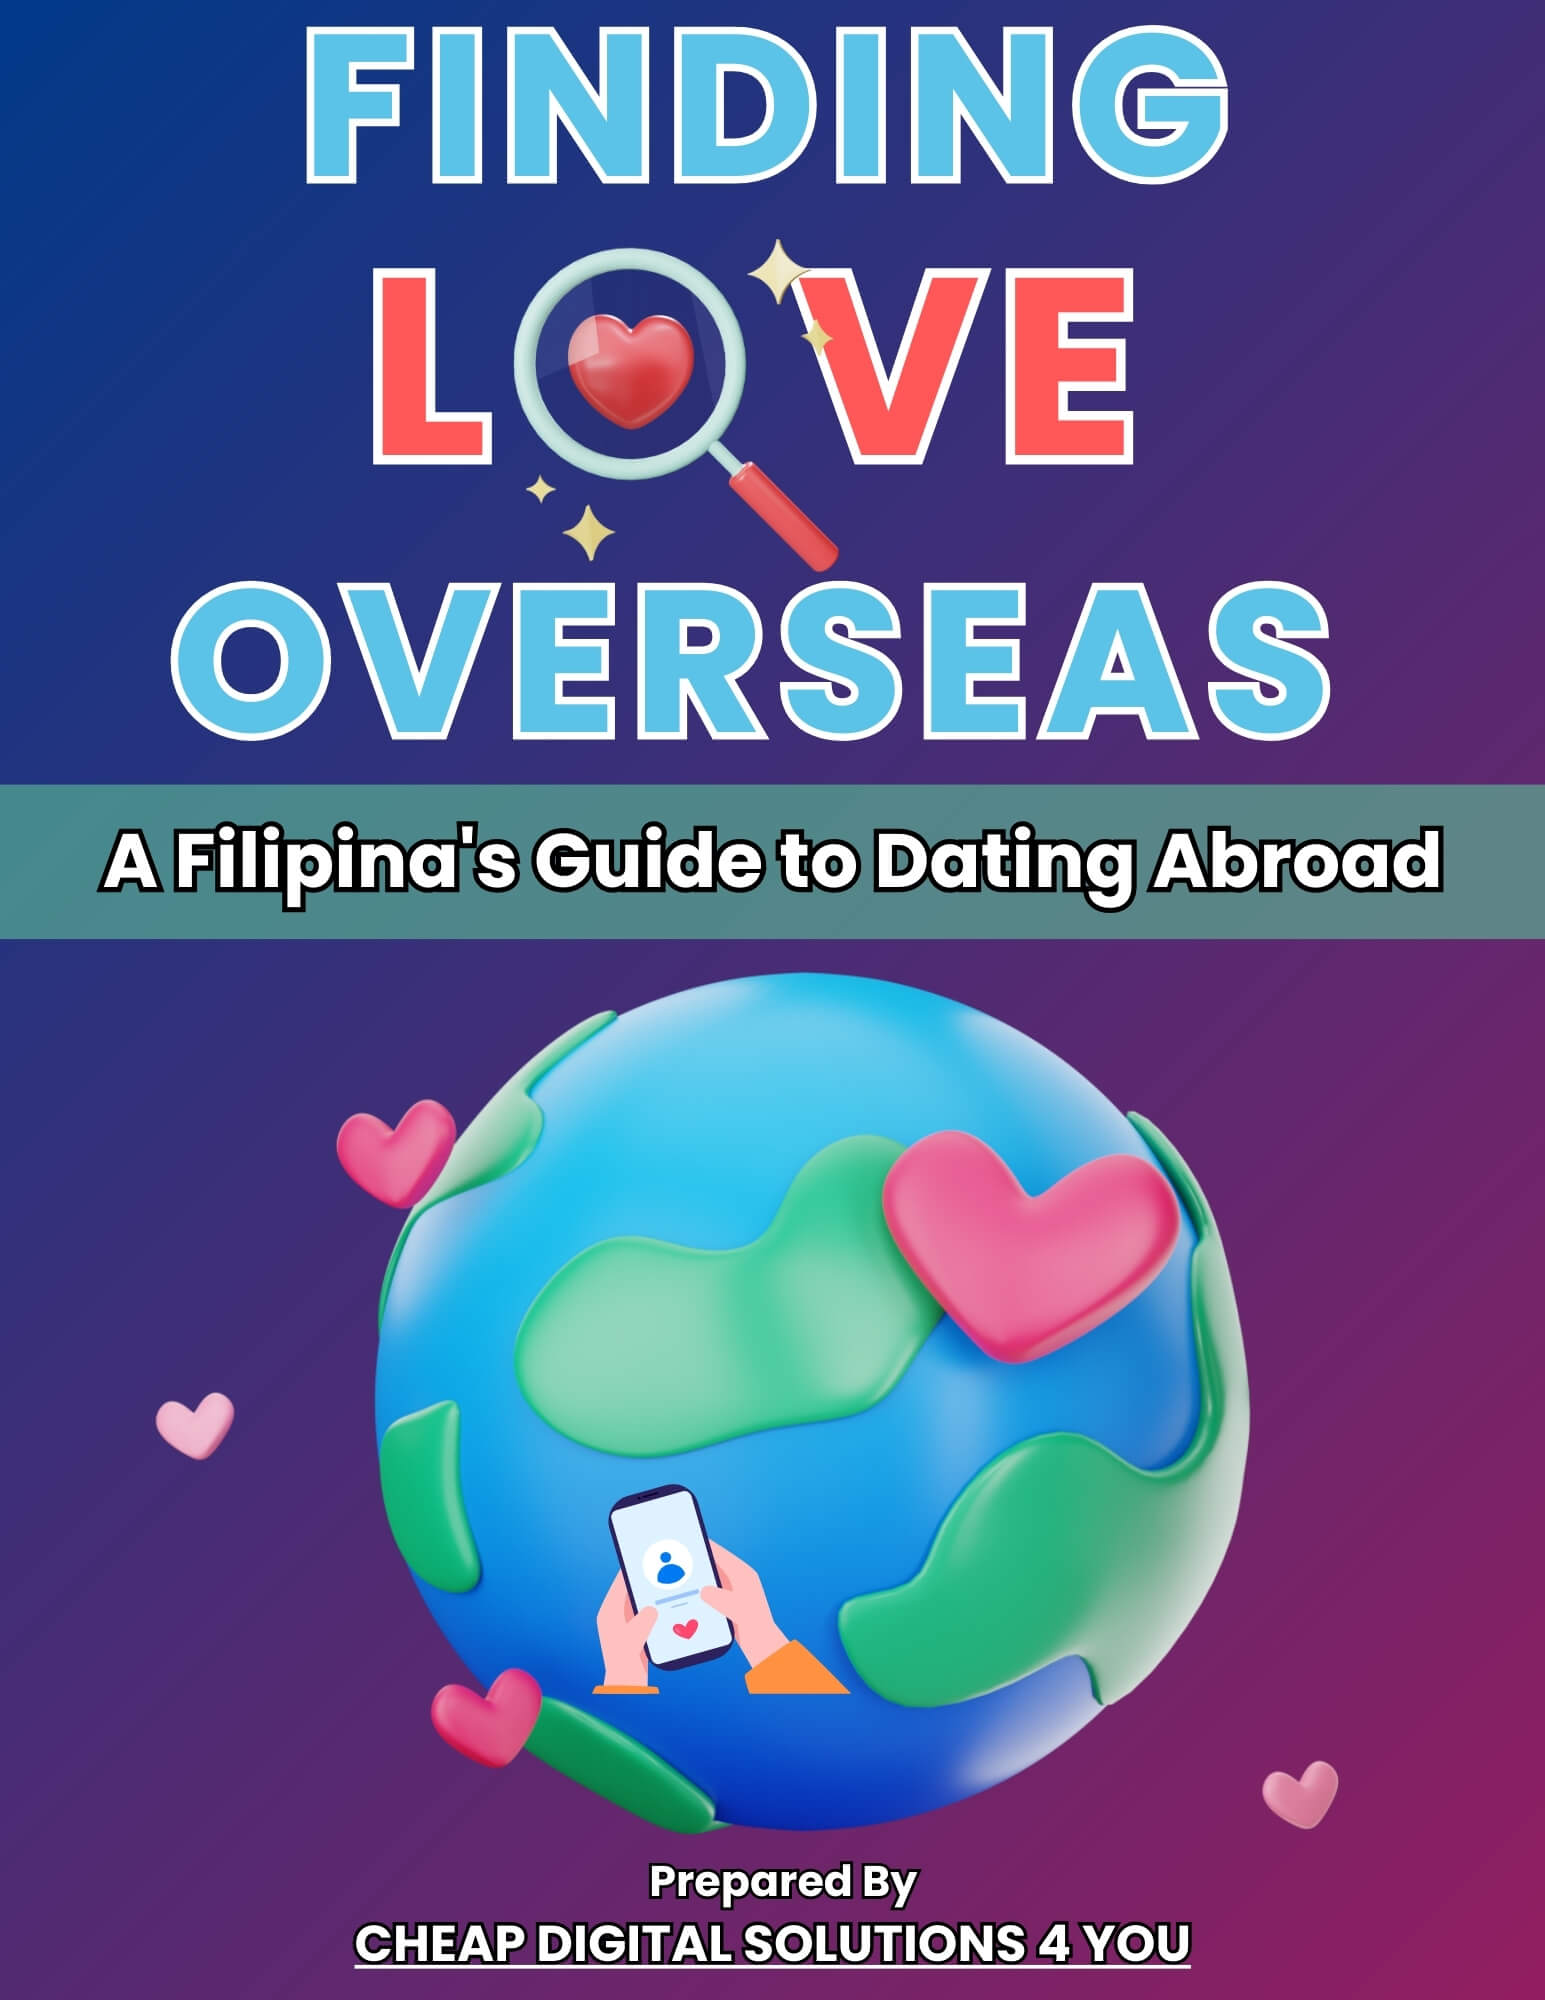 Finding Love Overseas - A Filipina's Guide to Dating Abroad